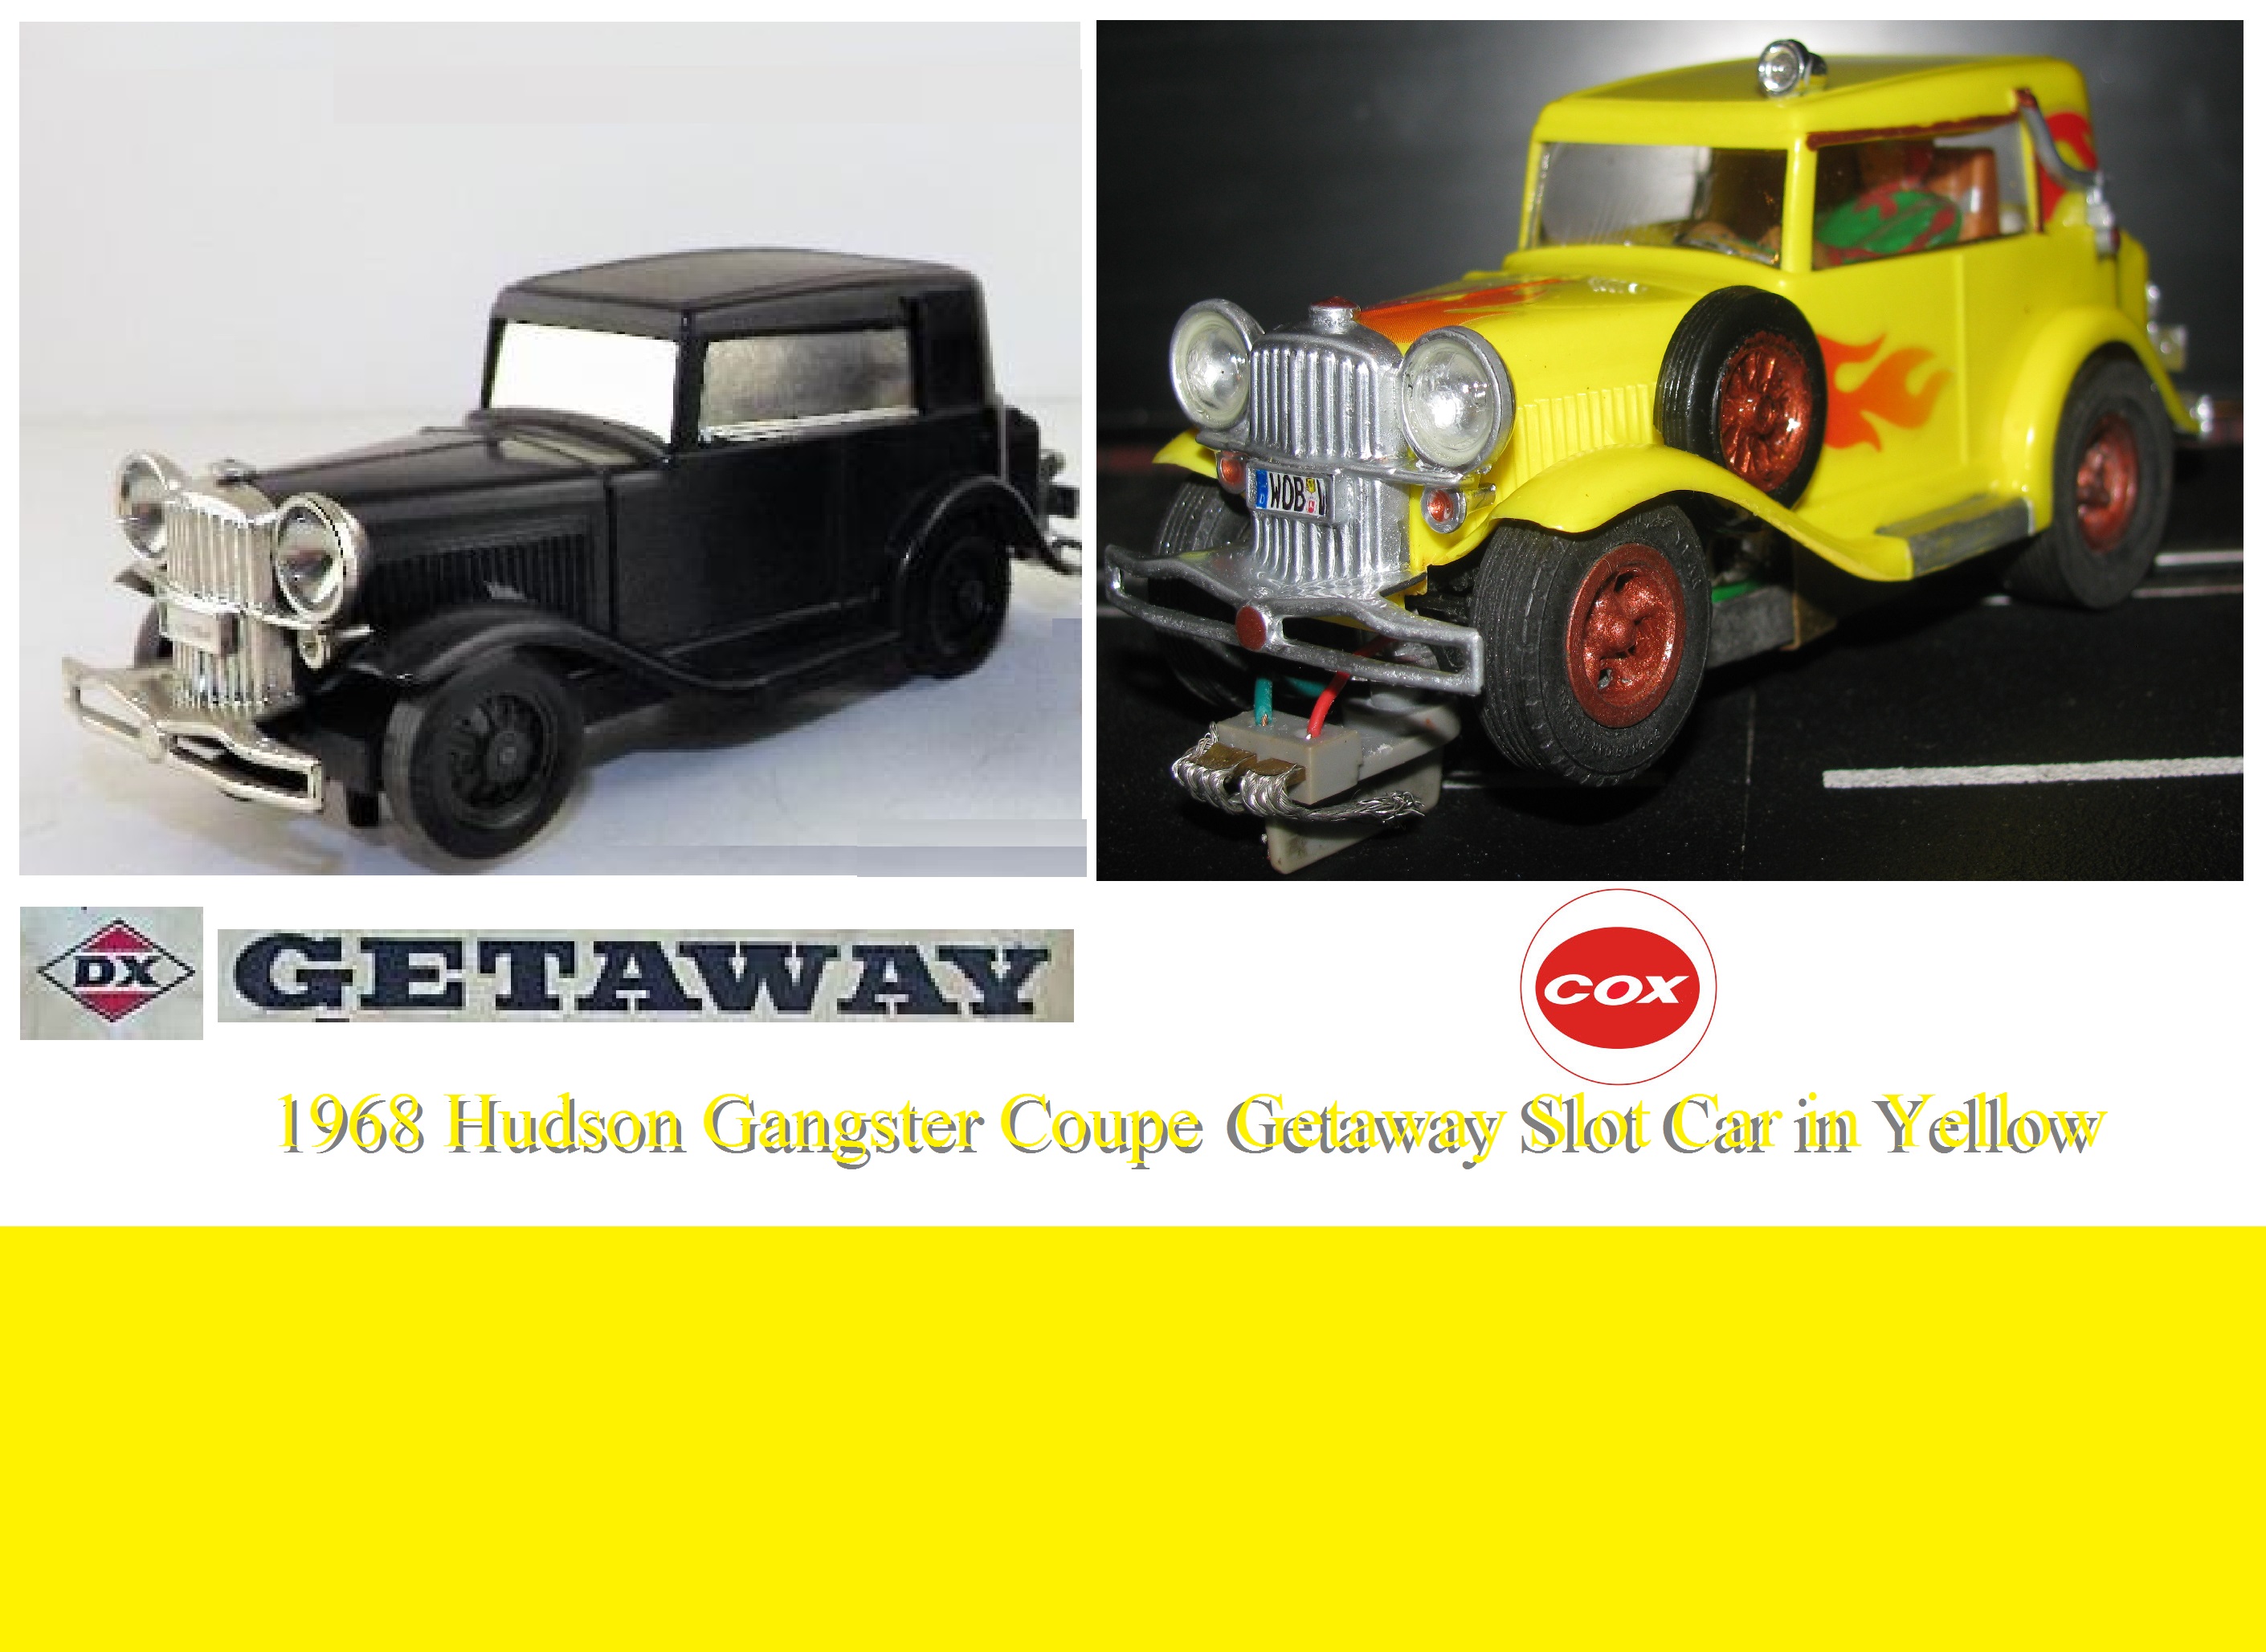 * SALE, Save $70 vs. our Ebay store price * 1968 Hudson Gangster Coupe Getaway 1:32 Scale Slot Car - Test Track